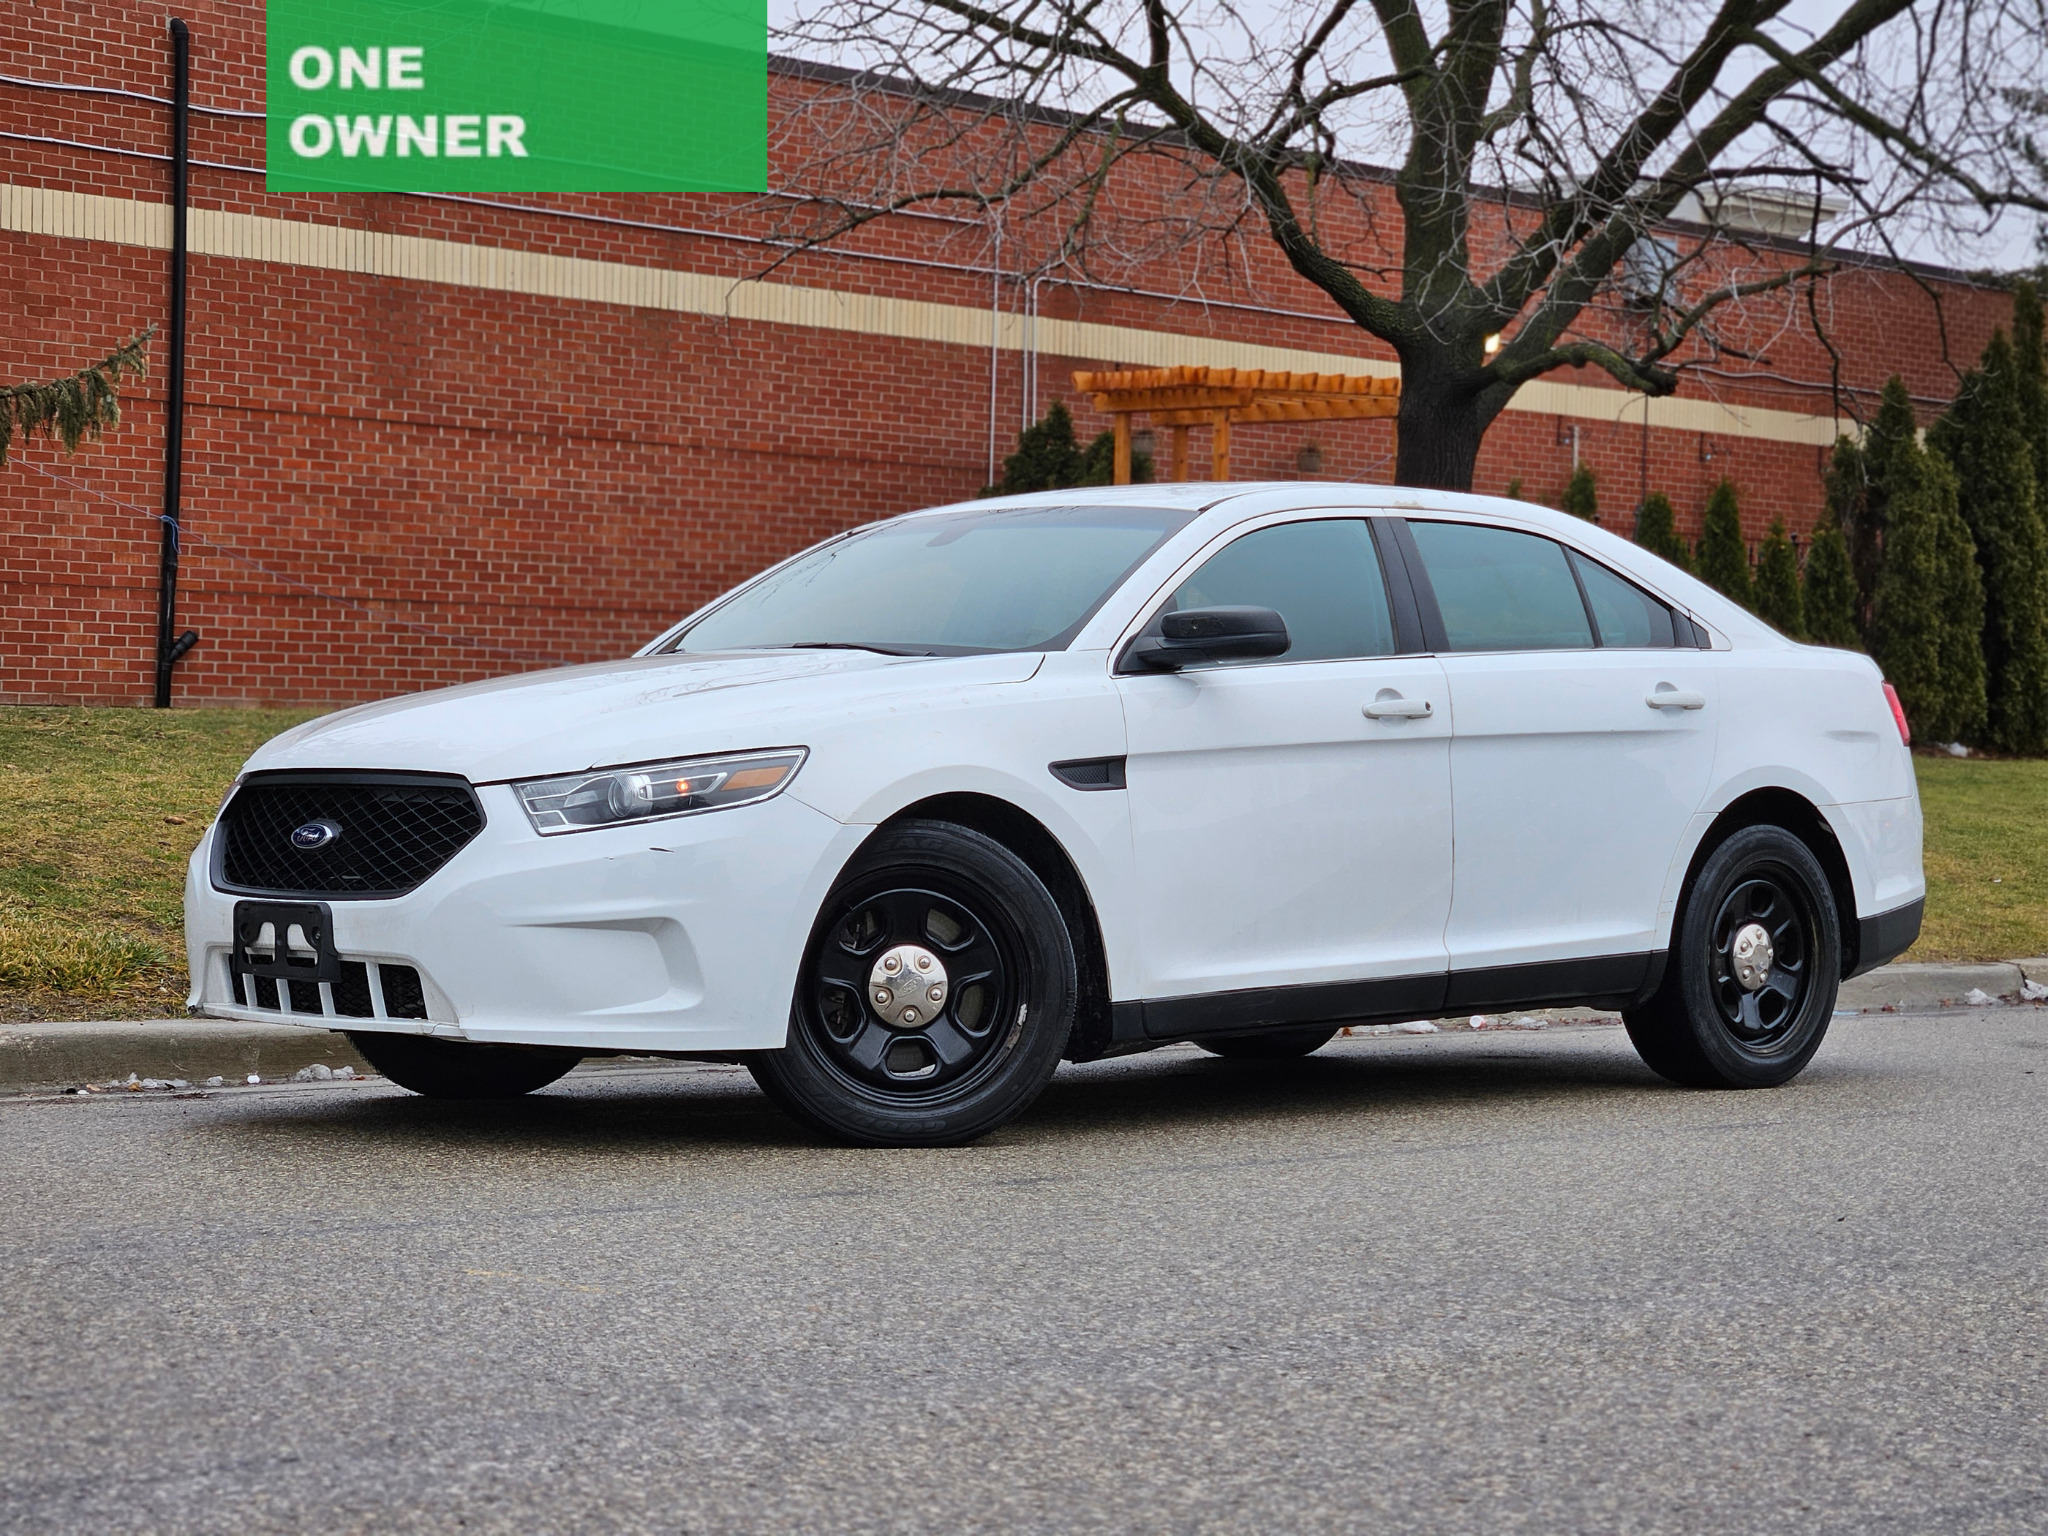 2015 Ford Police Interceptor Sedan AWD One Owner *Financing Available* More Choices